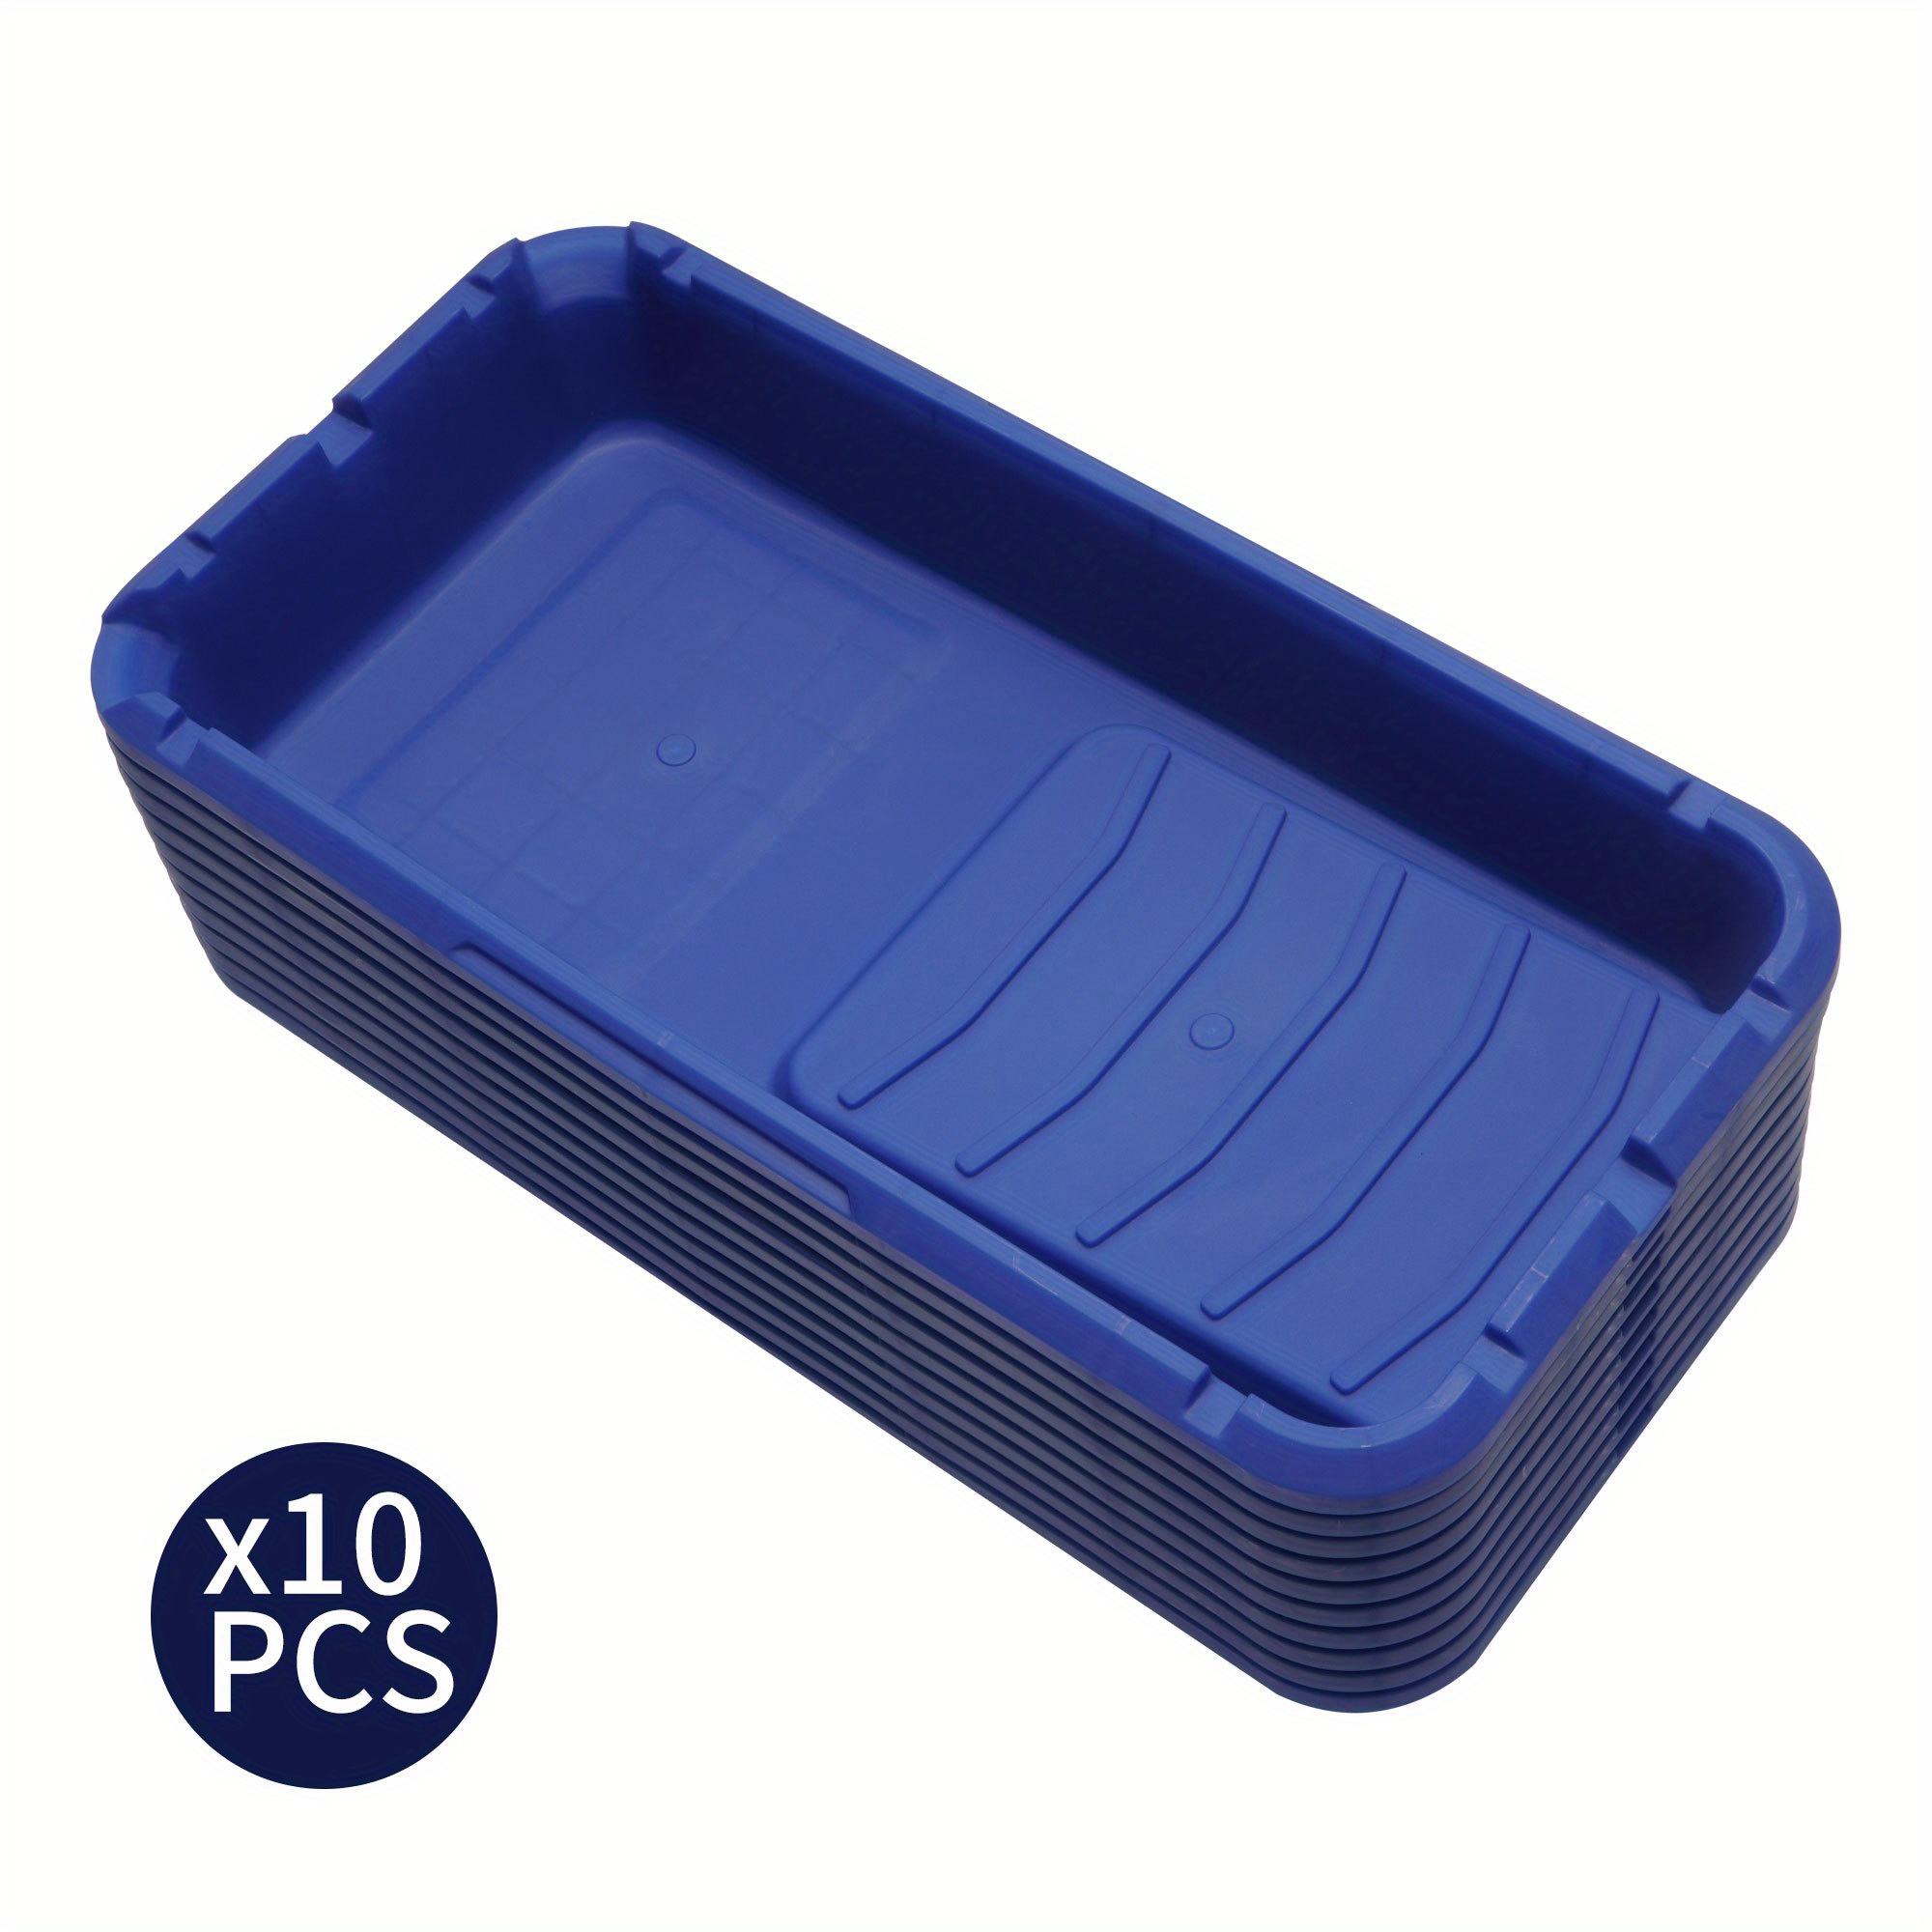  Voomey Paint Roller Tray,Plastic Paint Tray 4 inch